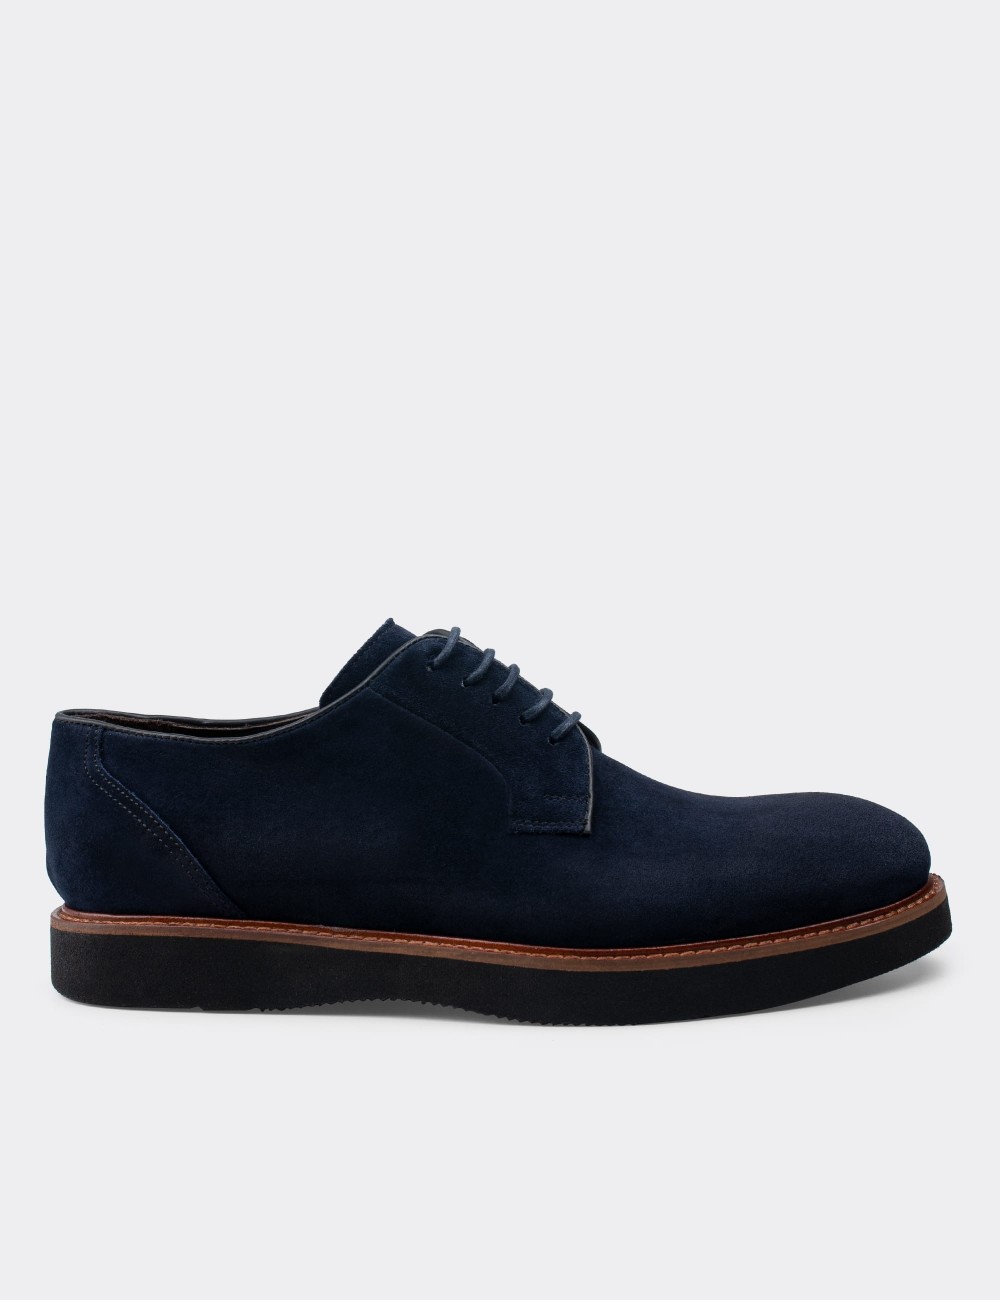 Navy Suede Leather Lace-up Shoes - 01090MLCVE06